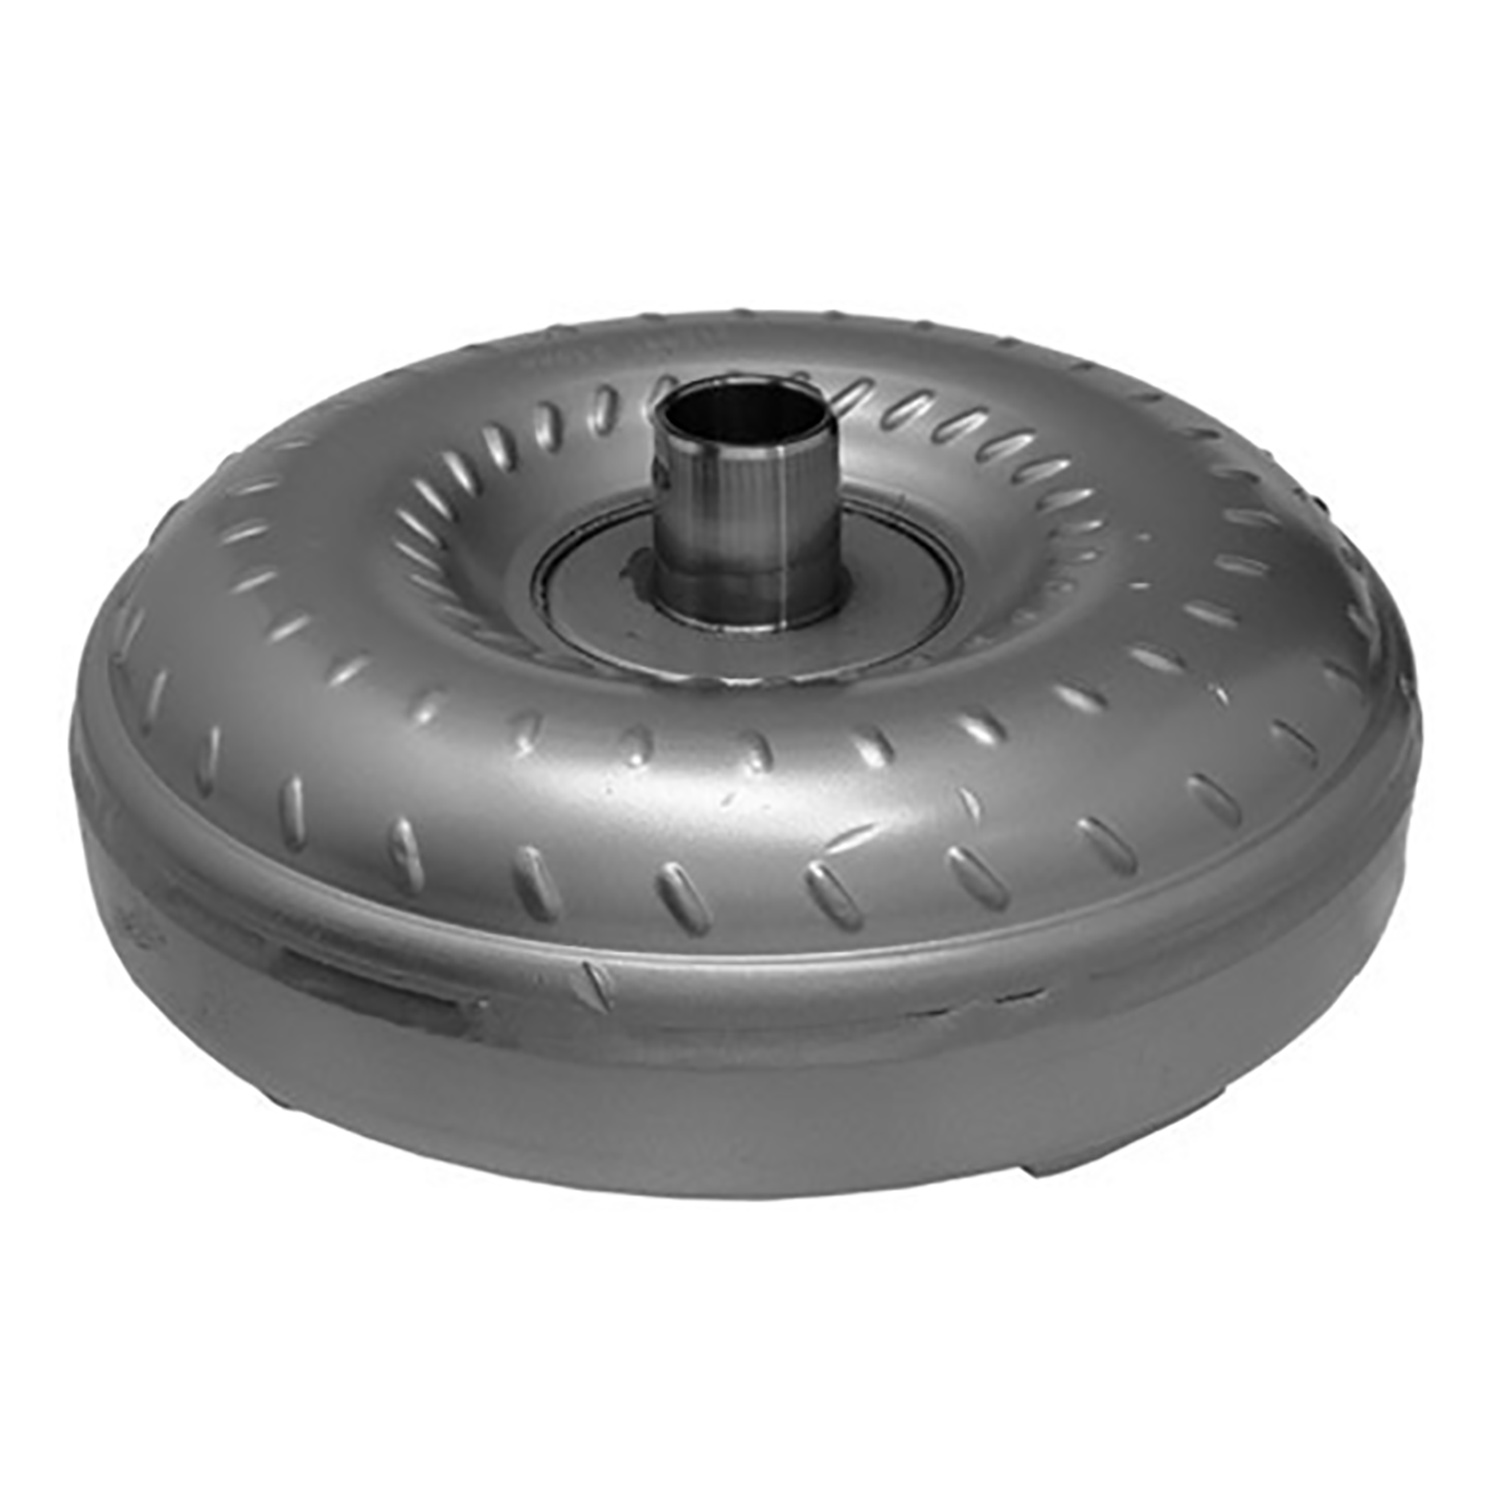 Remanufactured Automatic Transmission Torque Converter for Chrysler 3.5/3.6/3.8 62TE 07-19 HD